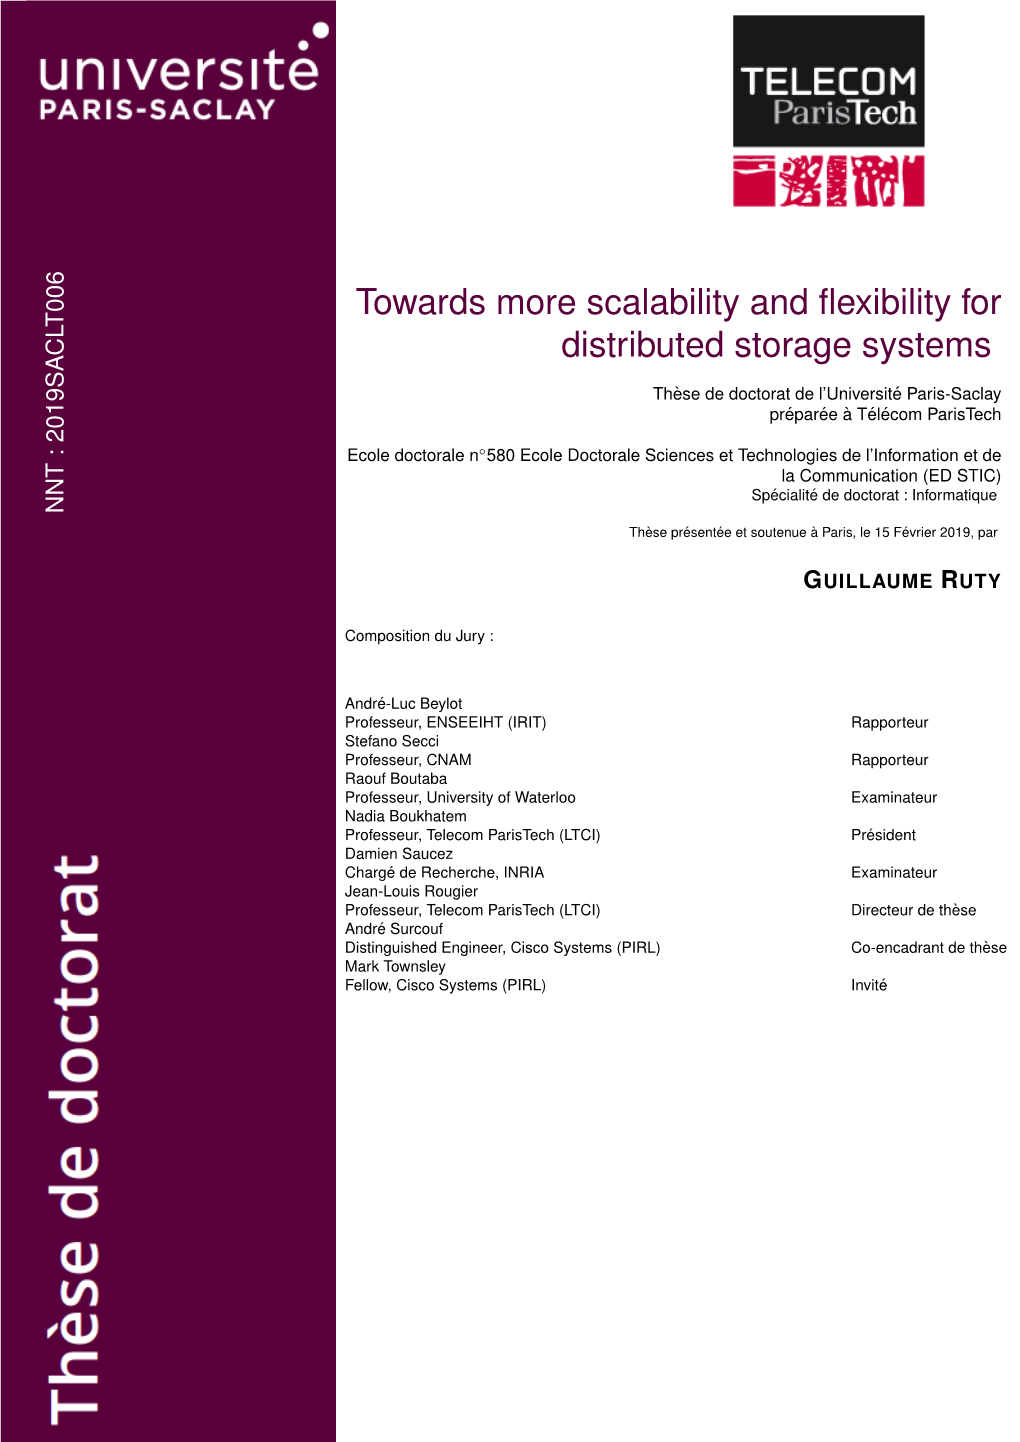 Towards More Scalability and Flexibility for Distributed Storage Systems